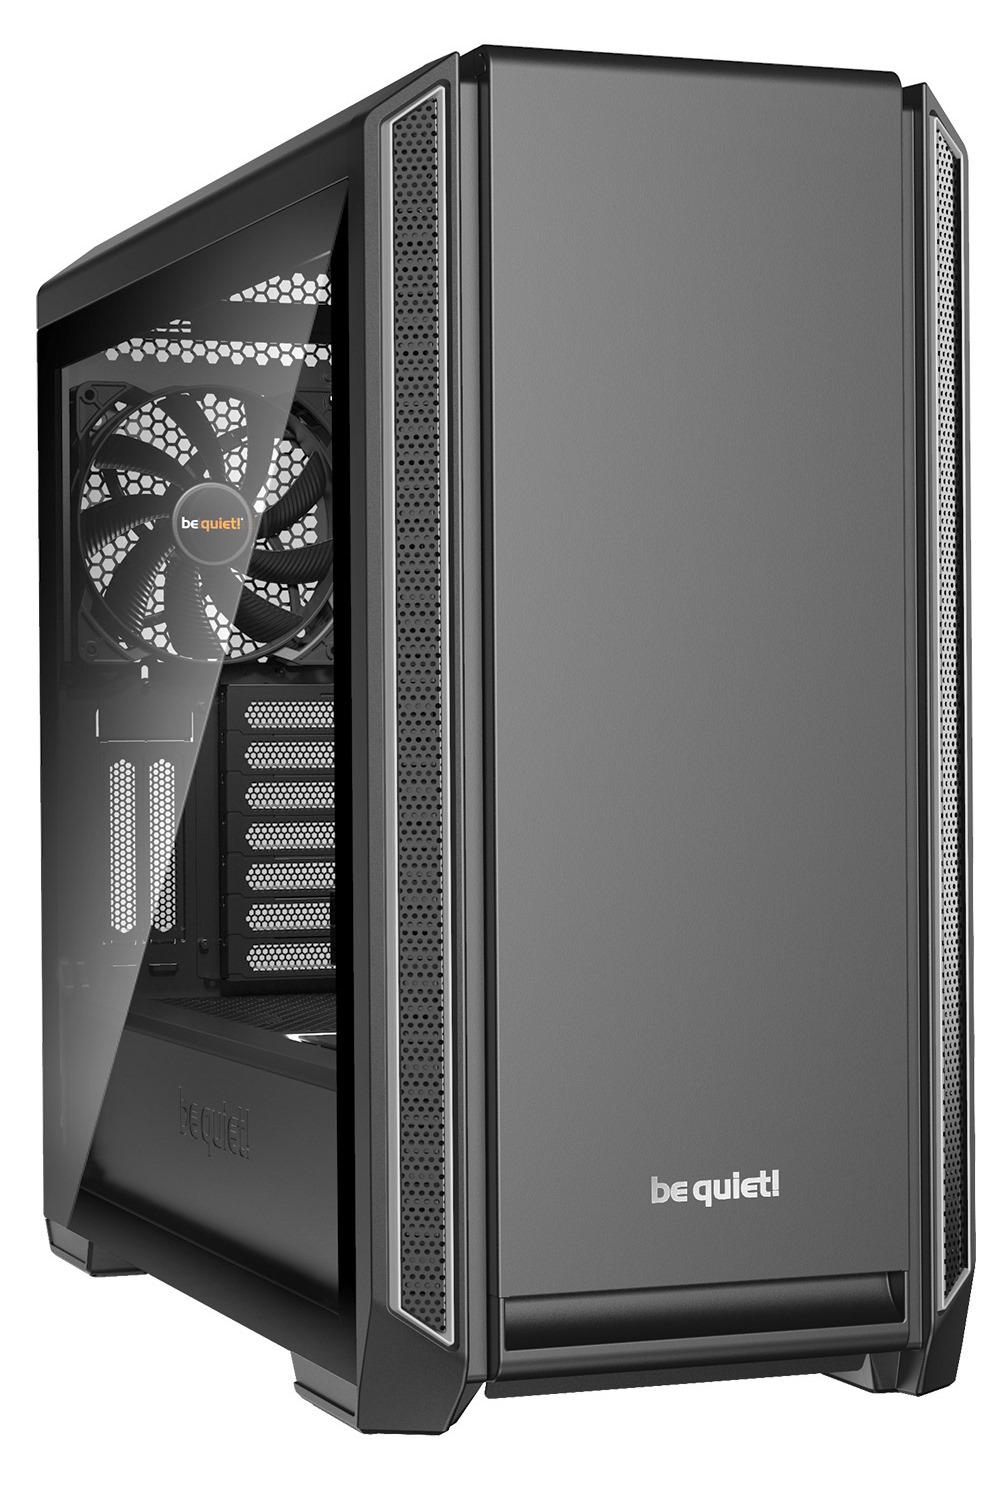 be quiet! Silent Base 601 Window Silver, 532 x 240 x 514, IO-panel 2x USB 3.0, 1x USB 2.0, HD Audio, 3 (7) x 3,5, 6 (14) x 2,5, inc 2x 140 mm Pure Wings 2, dual air channel cooling, Tinted and Tempered Glass side panel